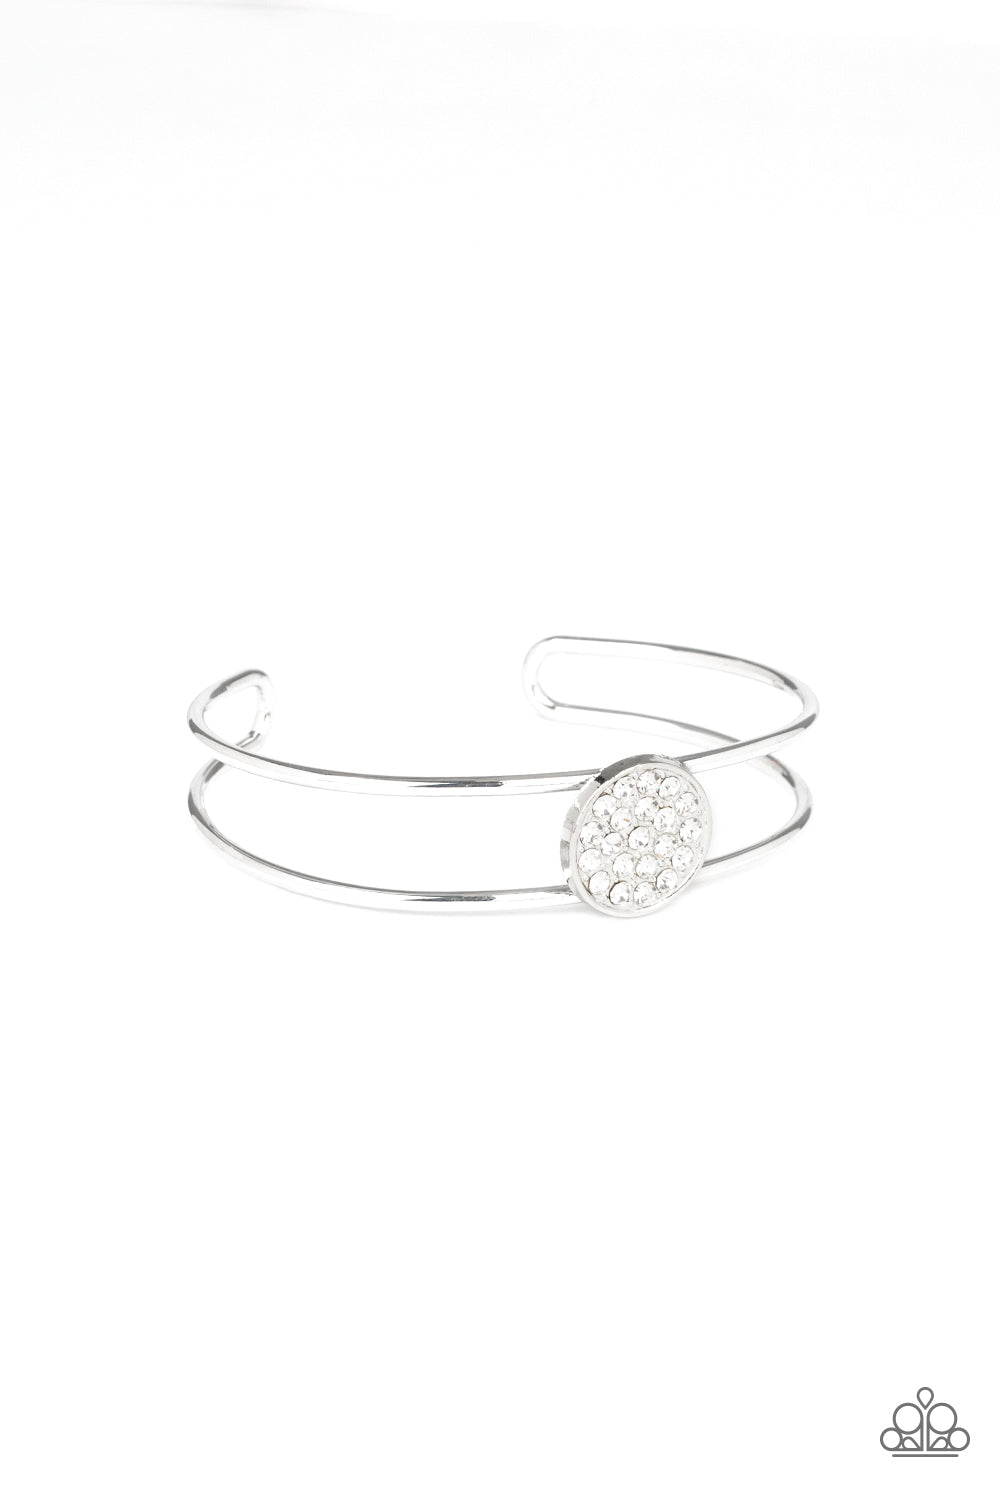 DIAL UP THE DAZZLE - WHITE DAINTY RHINESTONES DISC SILVER CUFF BRACELET